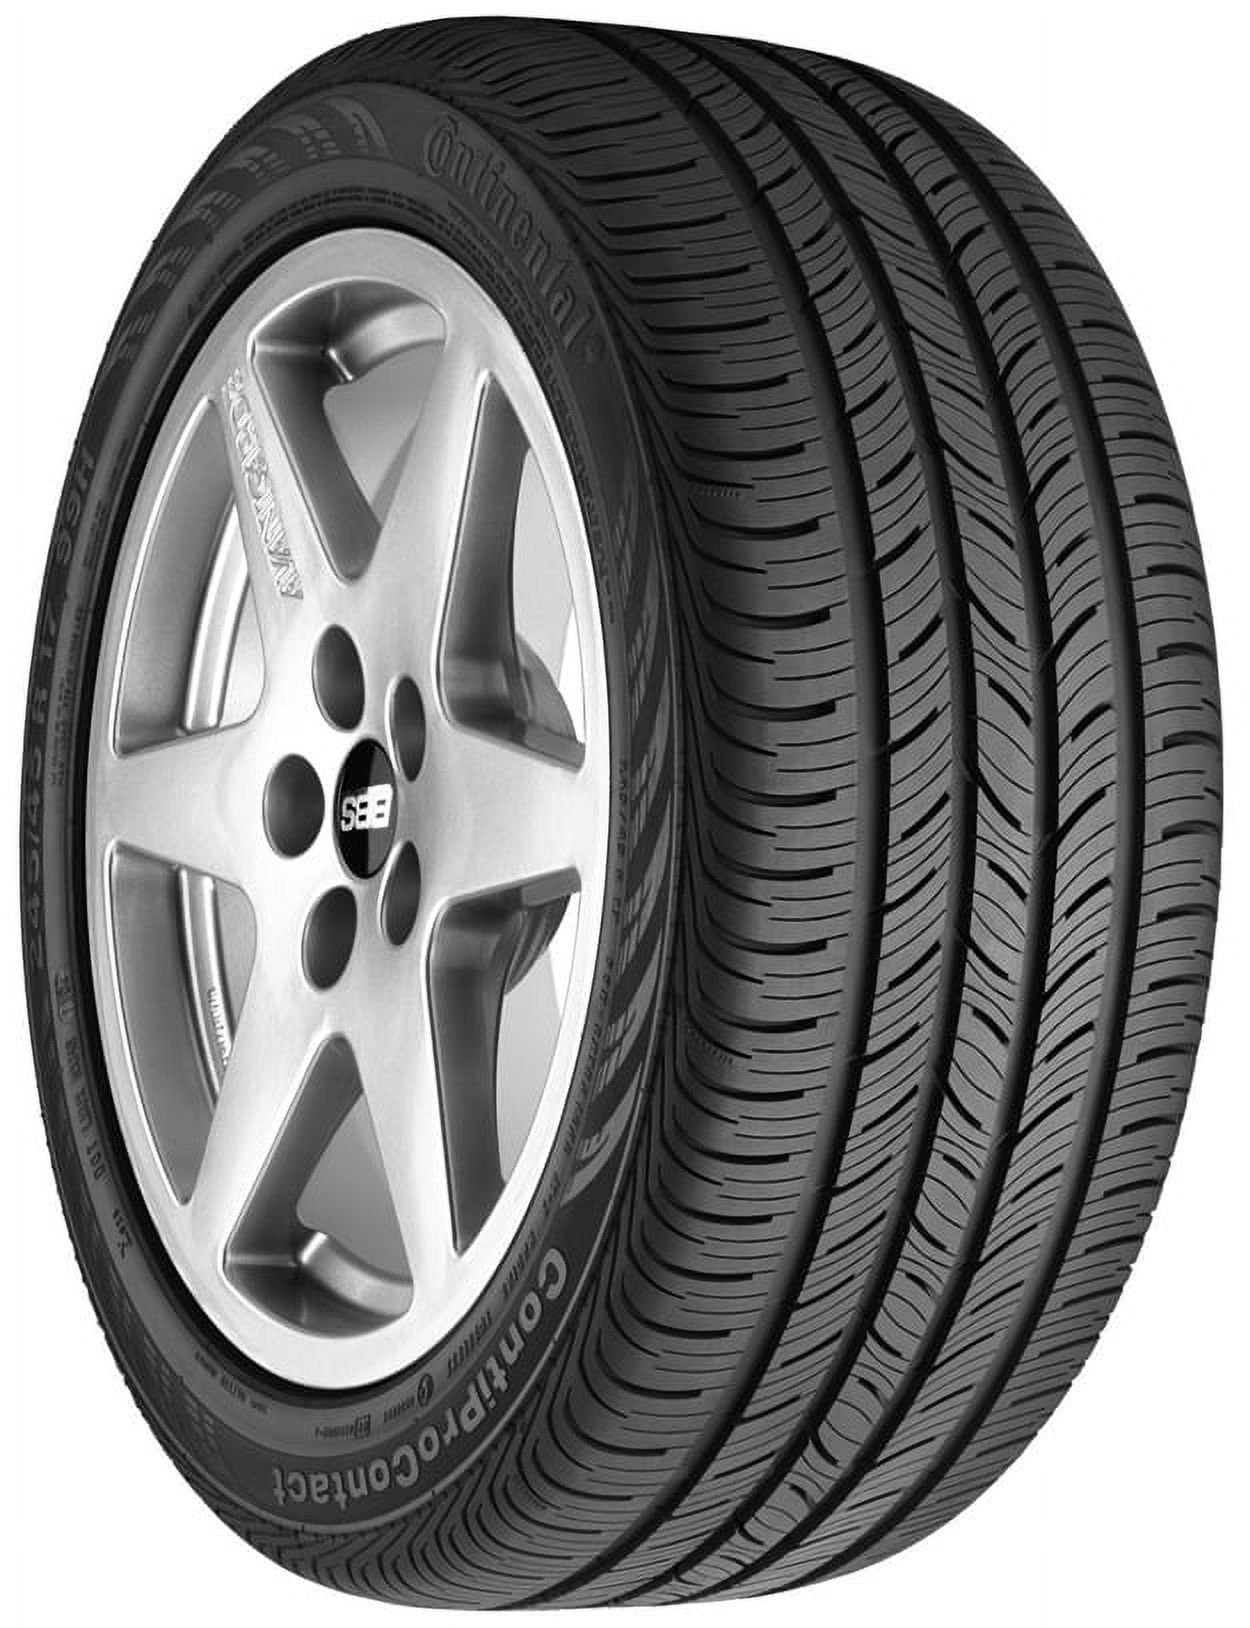 245/40R18 93H Continental Tire ContiProContact